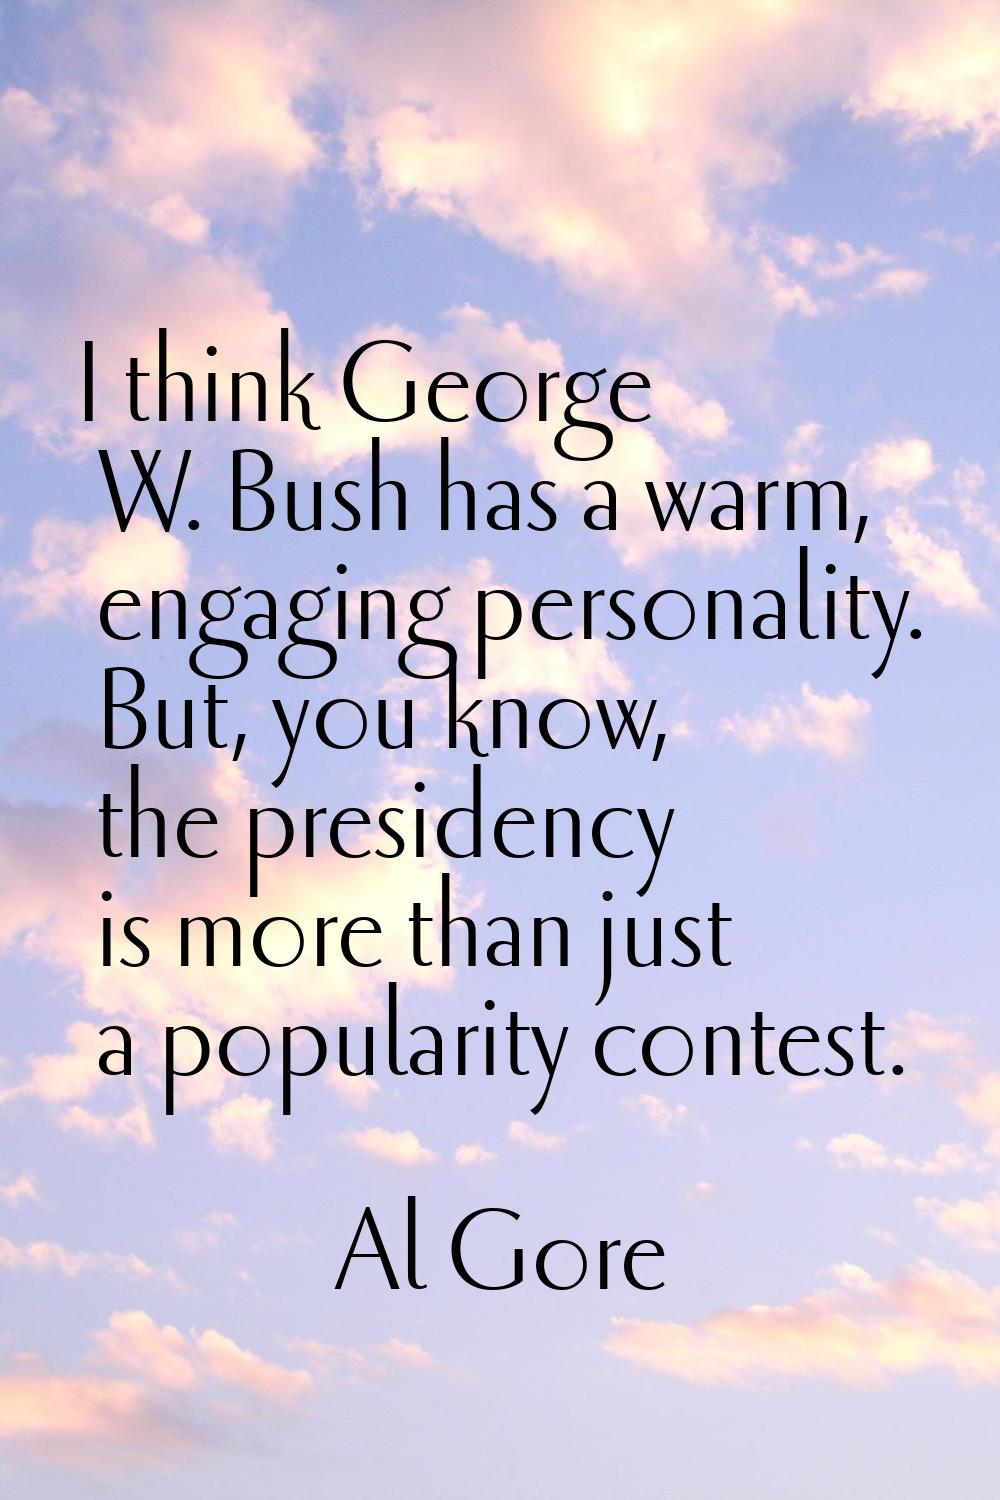 I think George W. Bush has a warm, engaging personality. But, you know, the presidency is more than